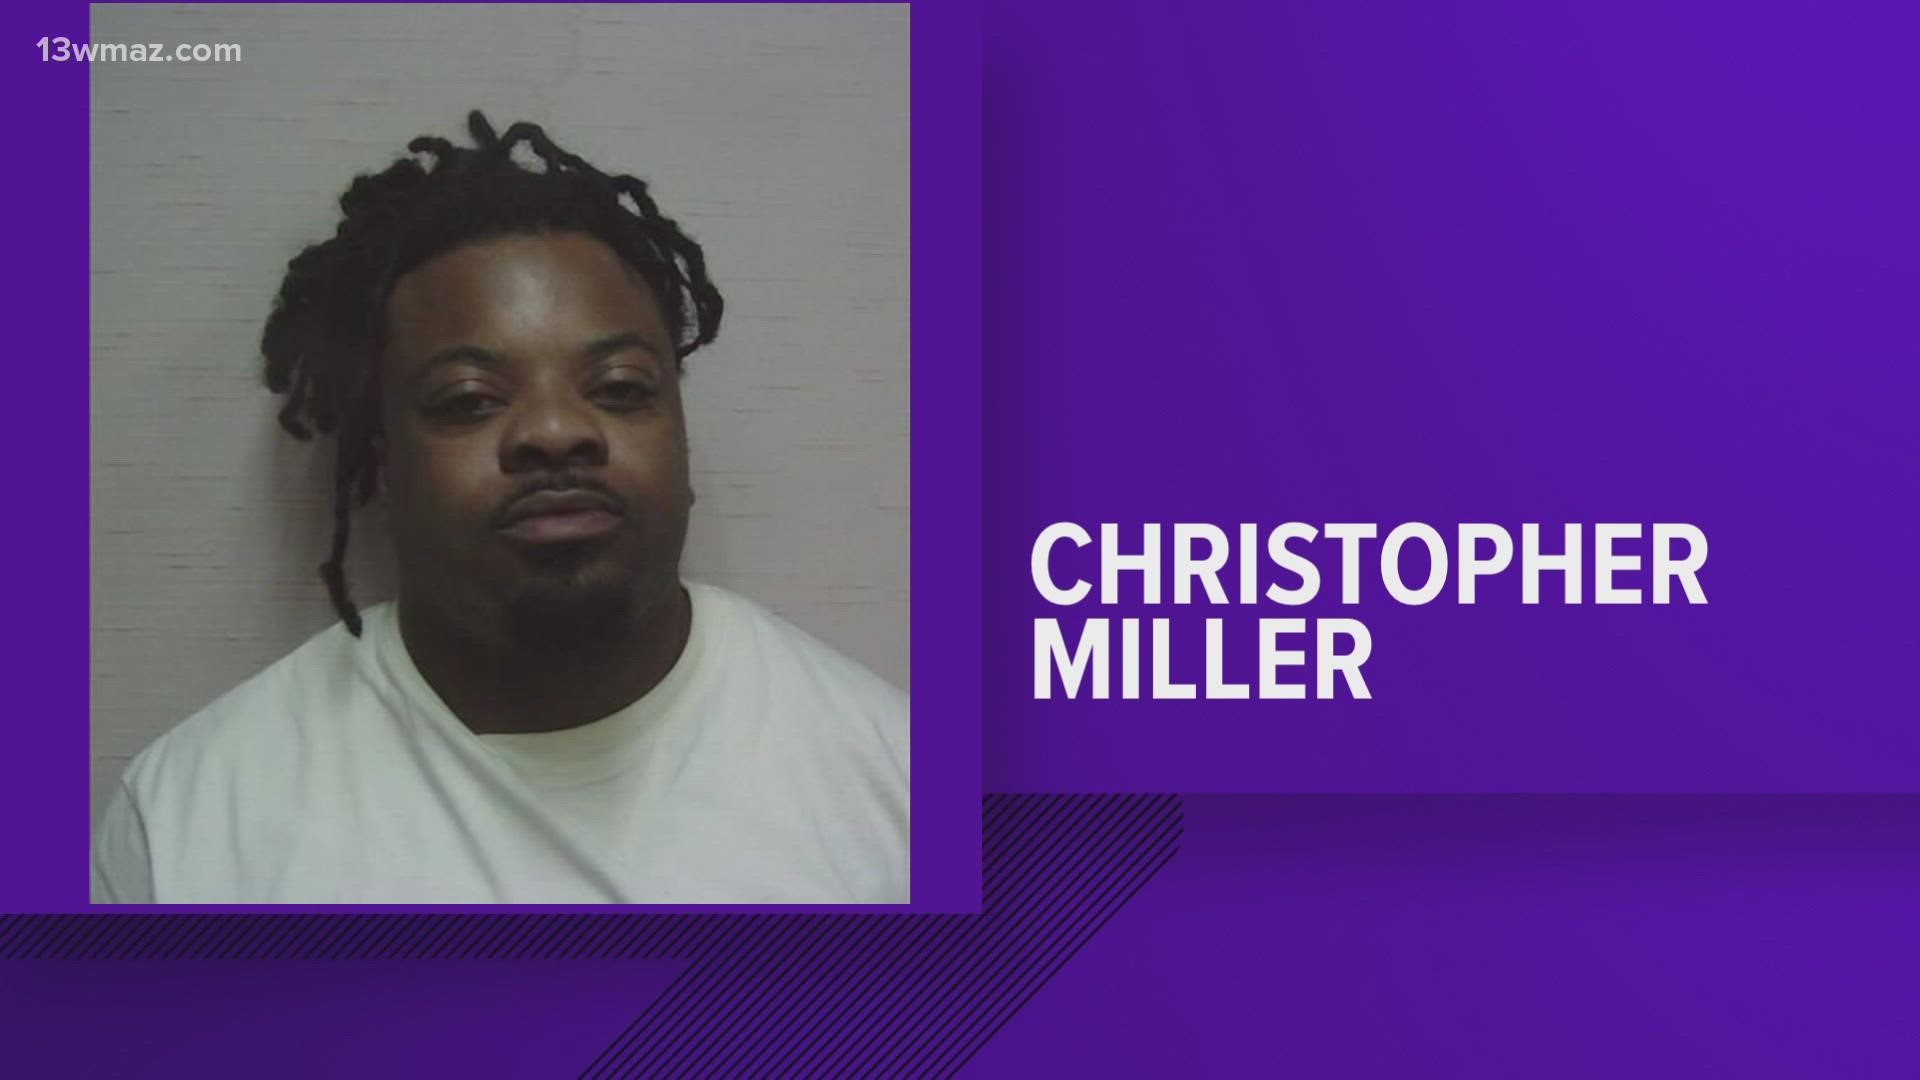 Christopher Miller was for arrested on Saturday night.